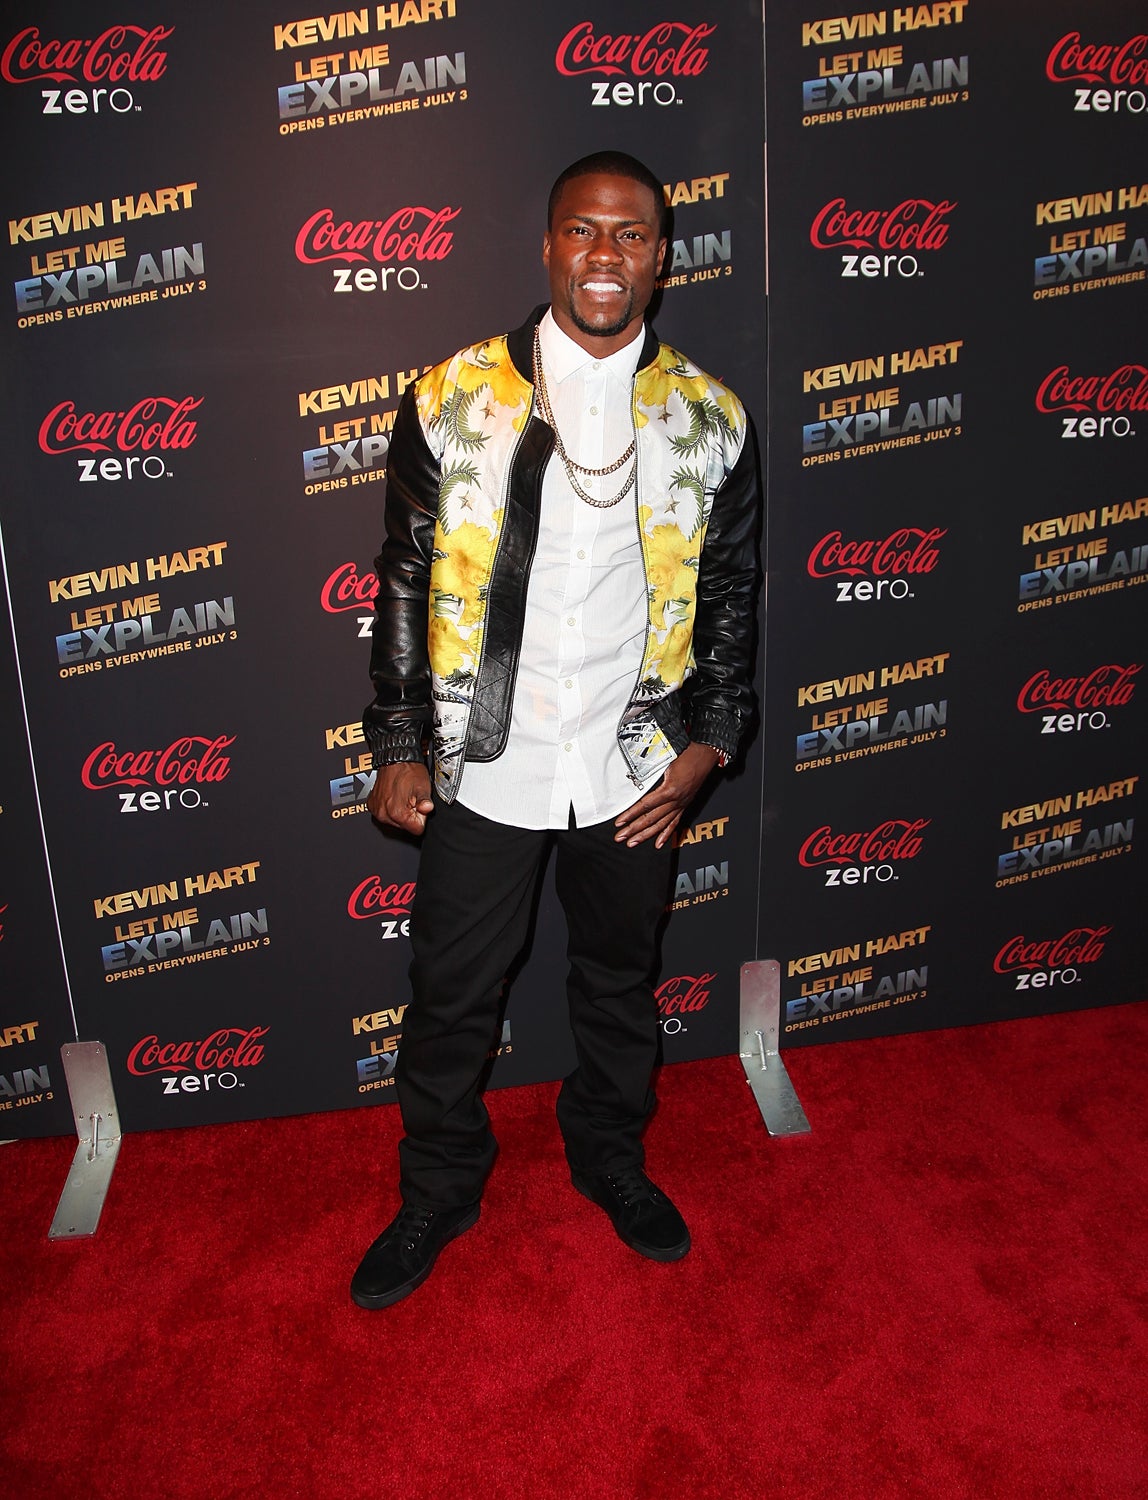 Kevin Hart Added to New Chris Rock Comedy
